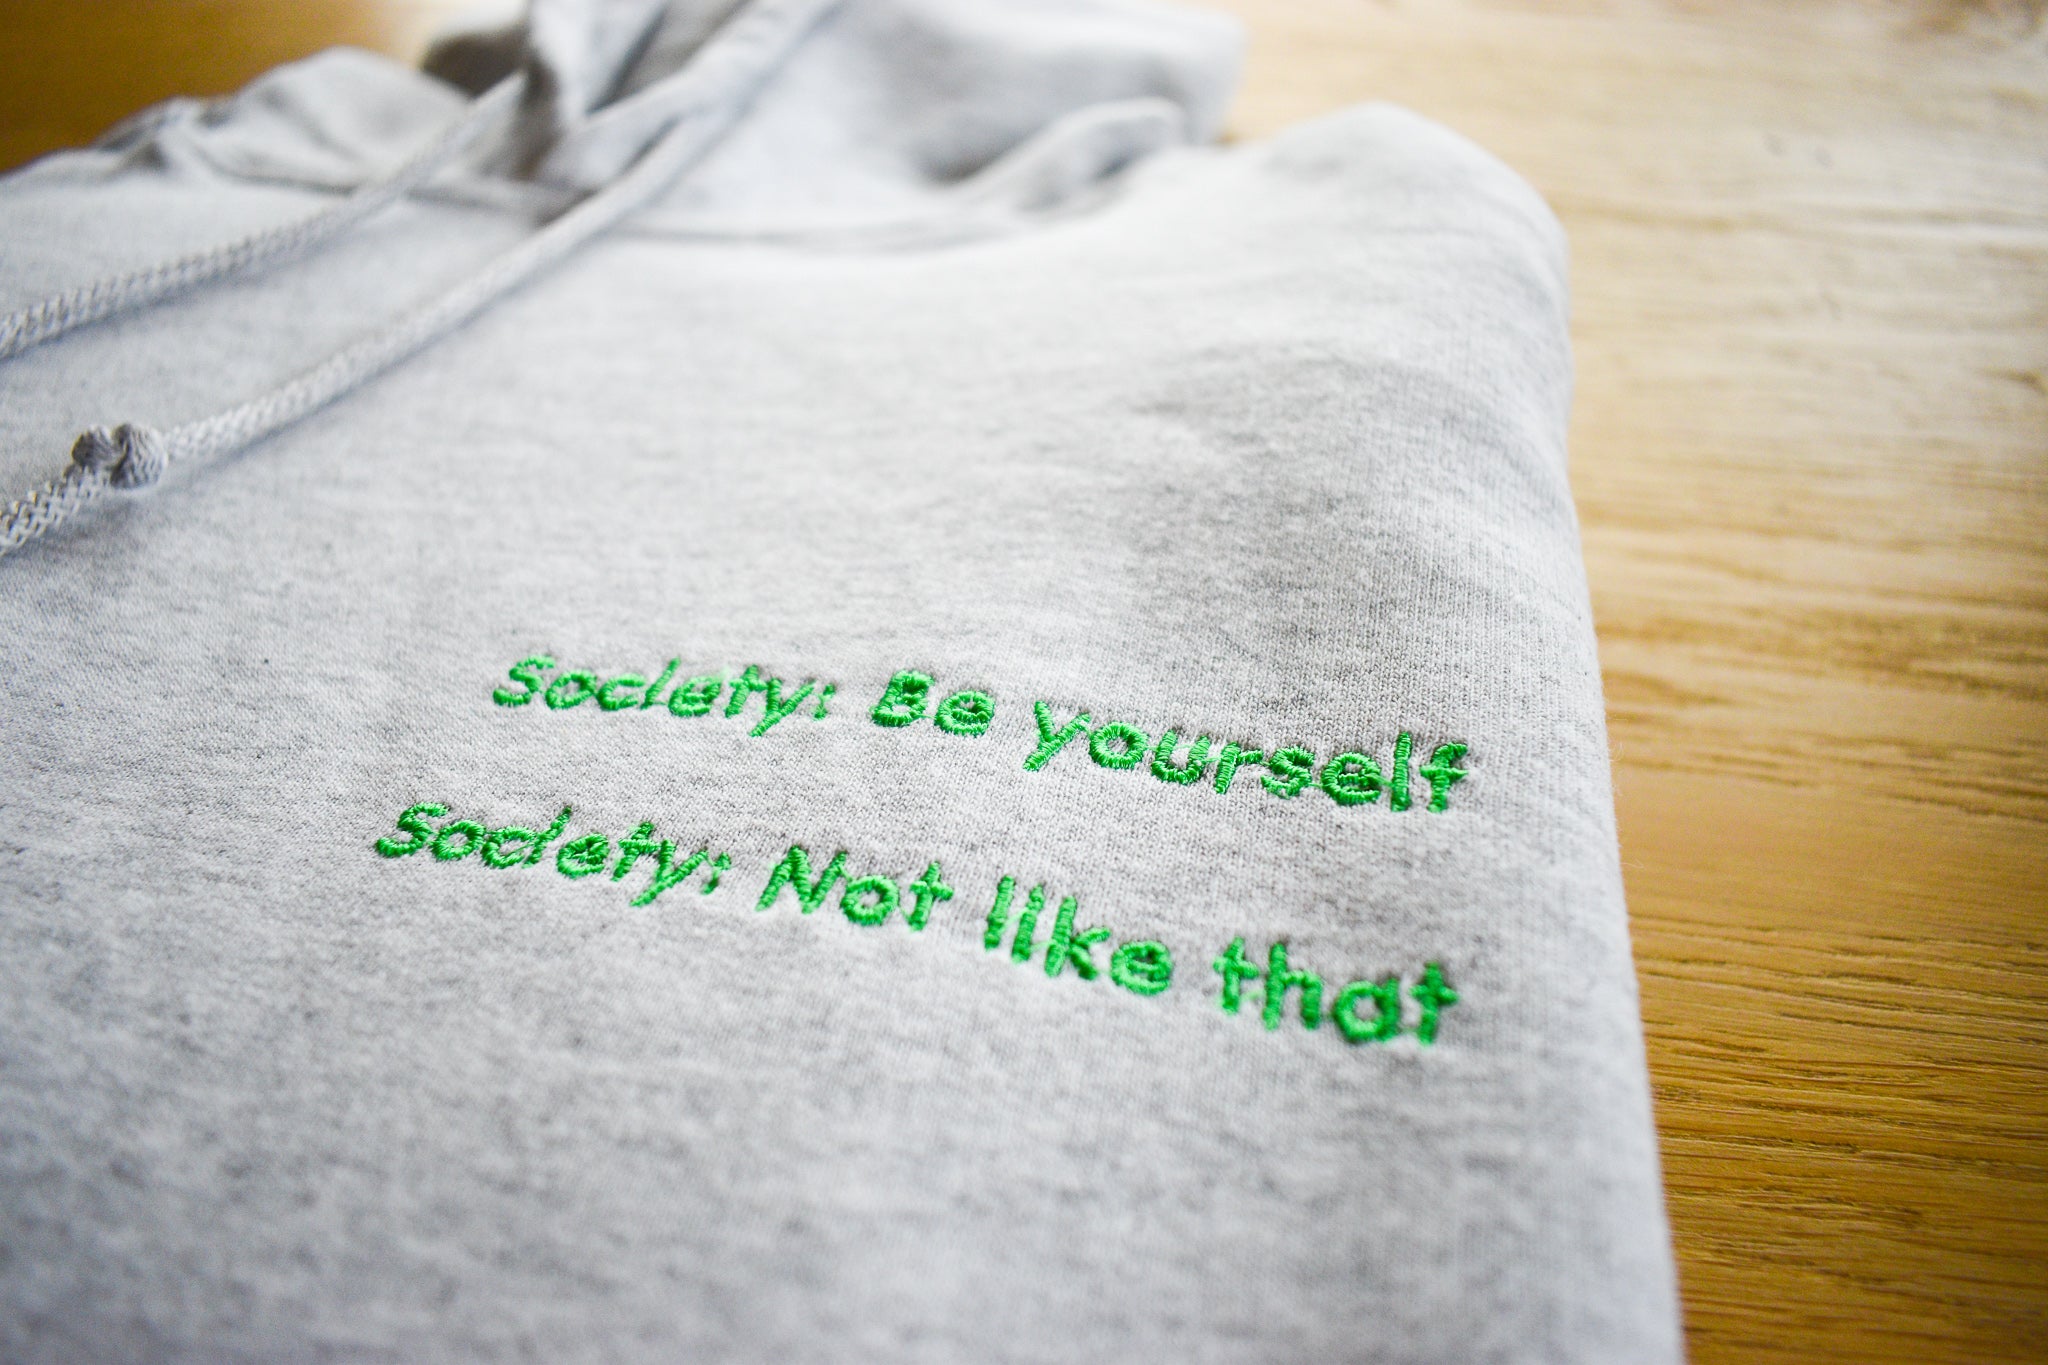 Society: Be yourself (not like that)